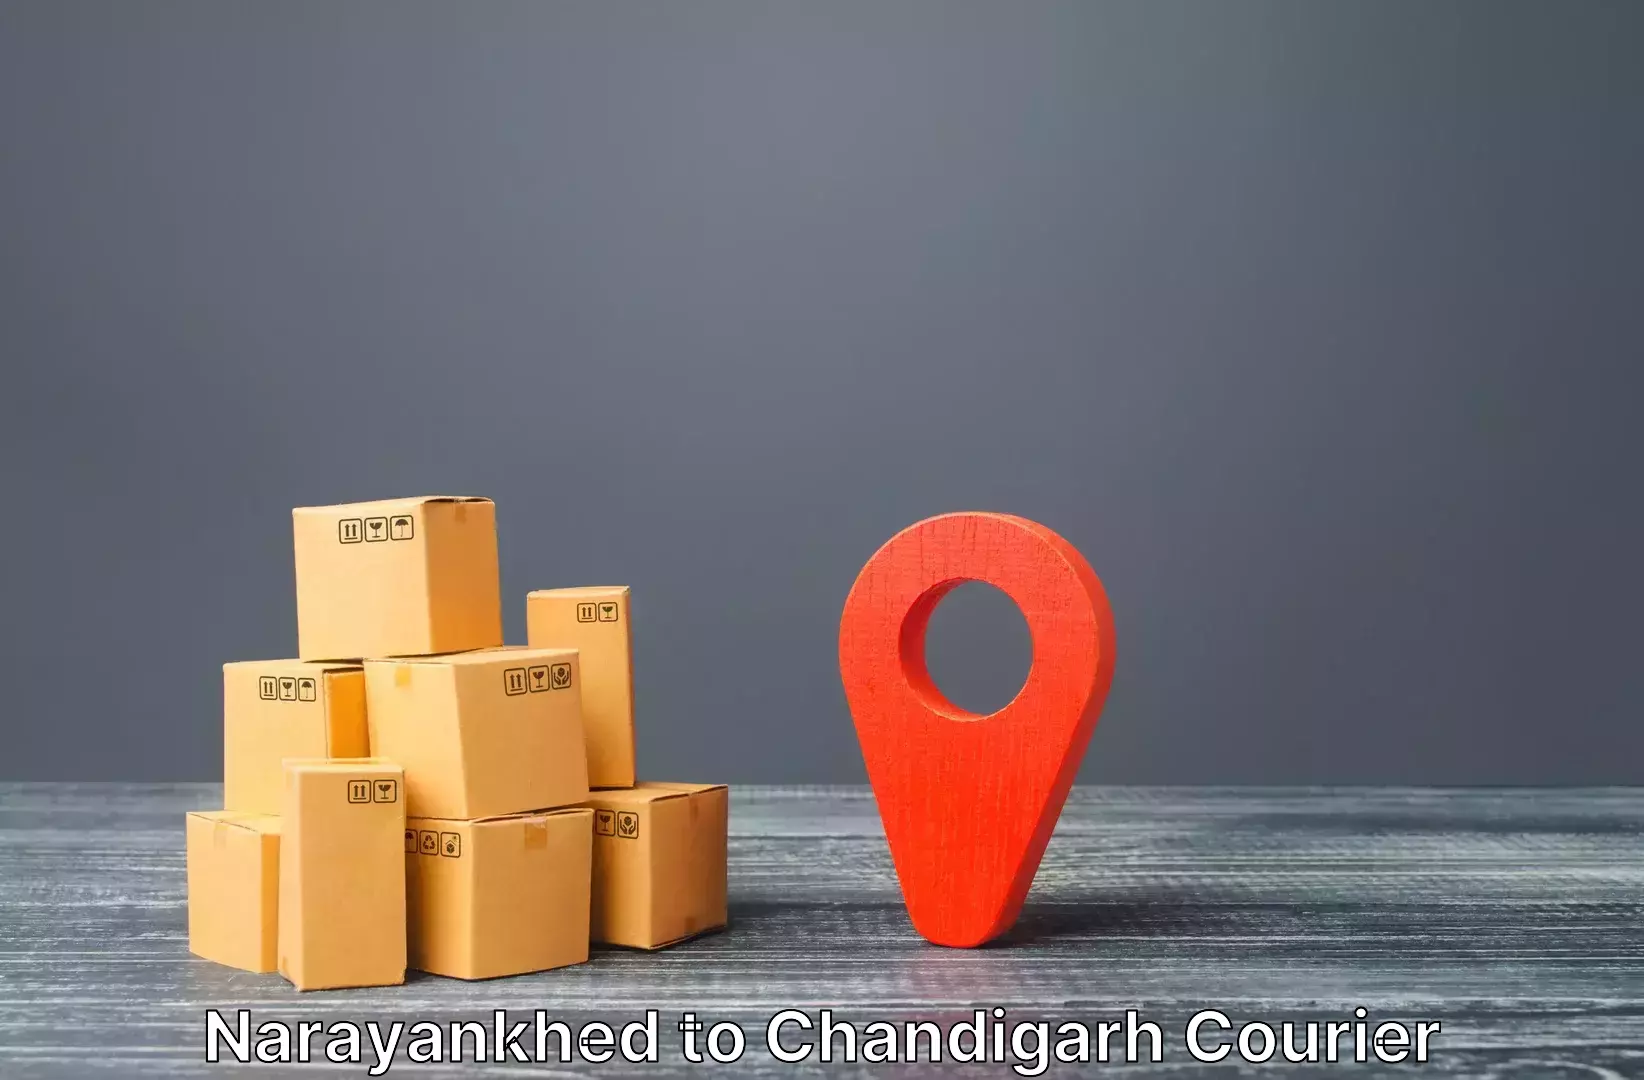 Doorstep luggage collection Narayankhed to Chandigarh